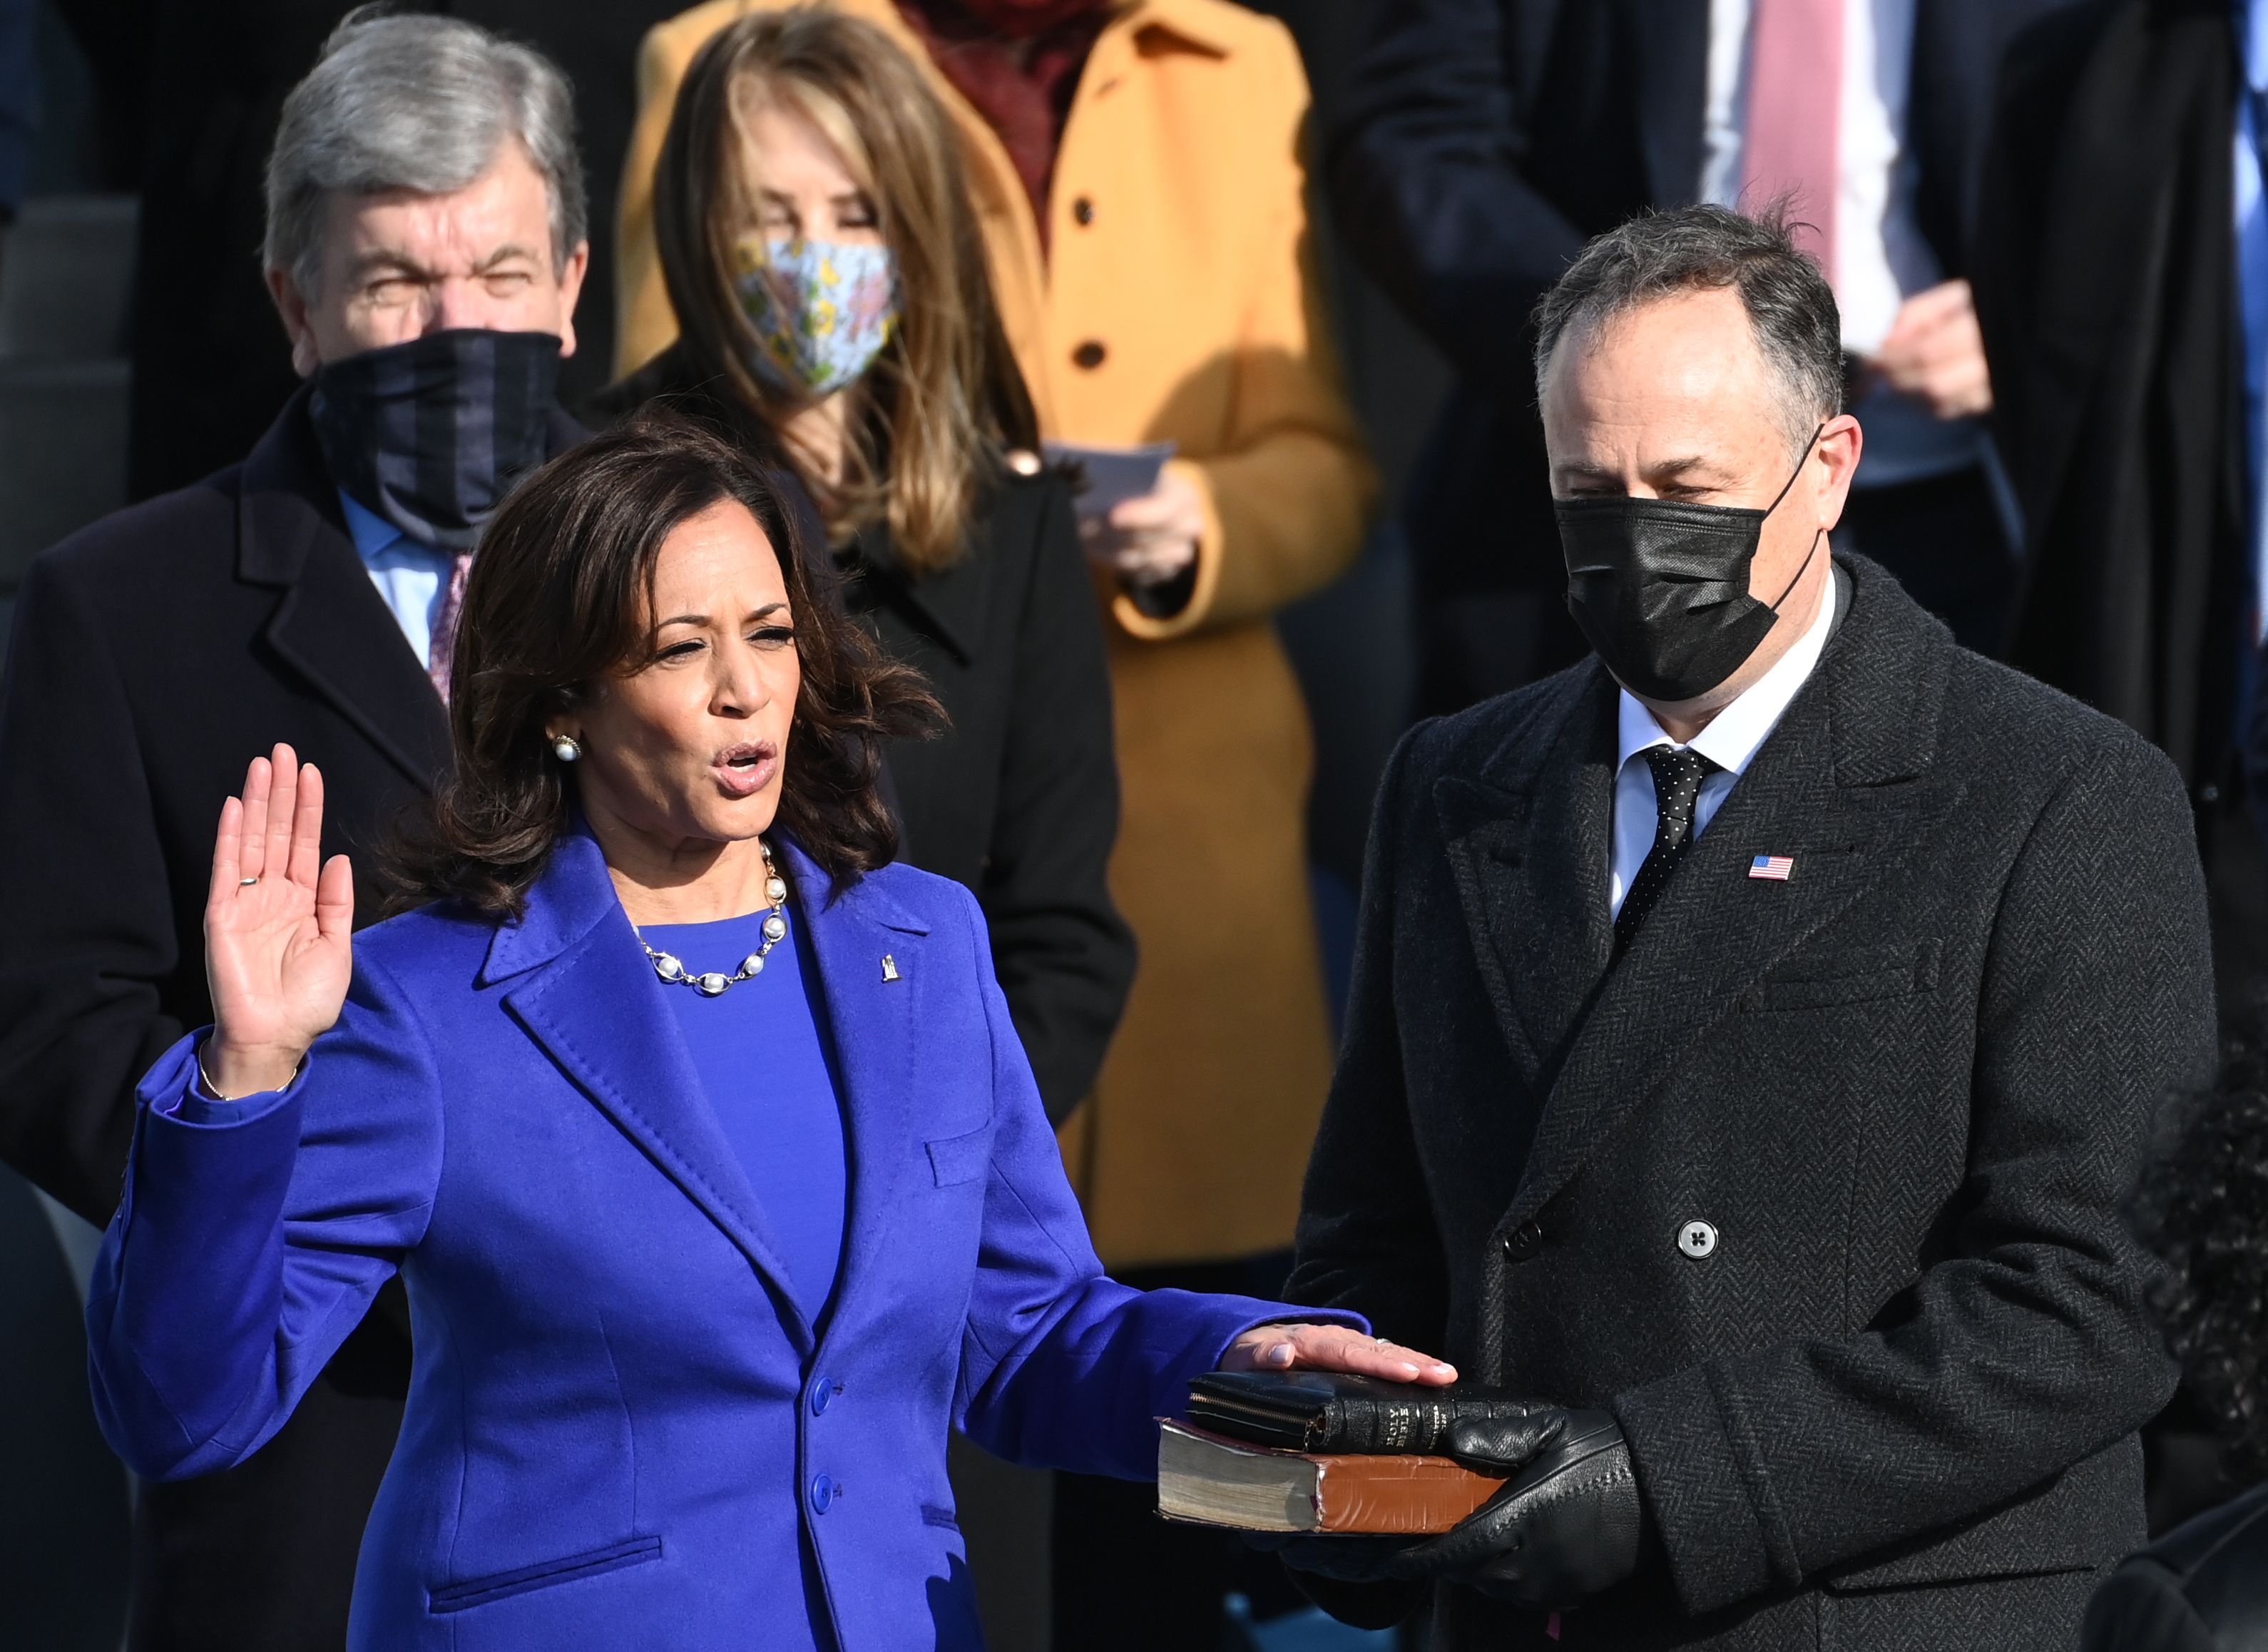 Kamala Harris pictured taking an oath during the Inauguration Day on January 21, 2021, at the U.S. Capitol grounds in Washington, D.C. | Photo: Getty Images